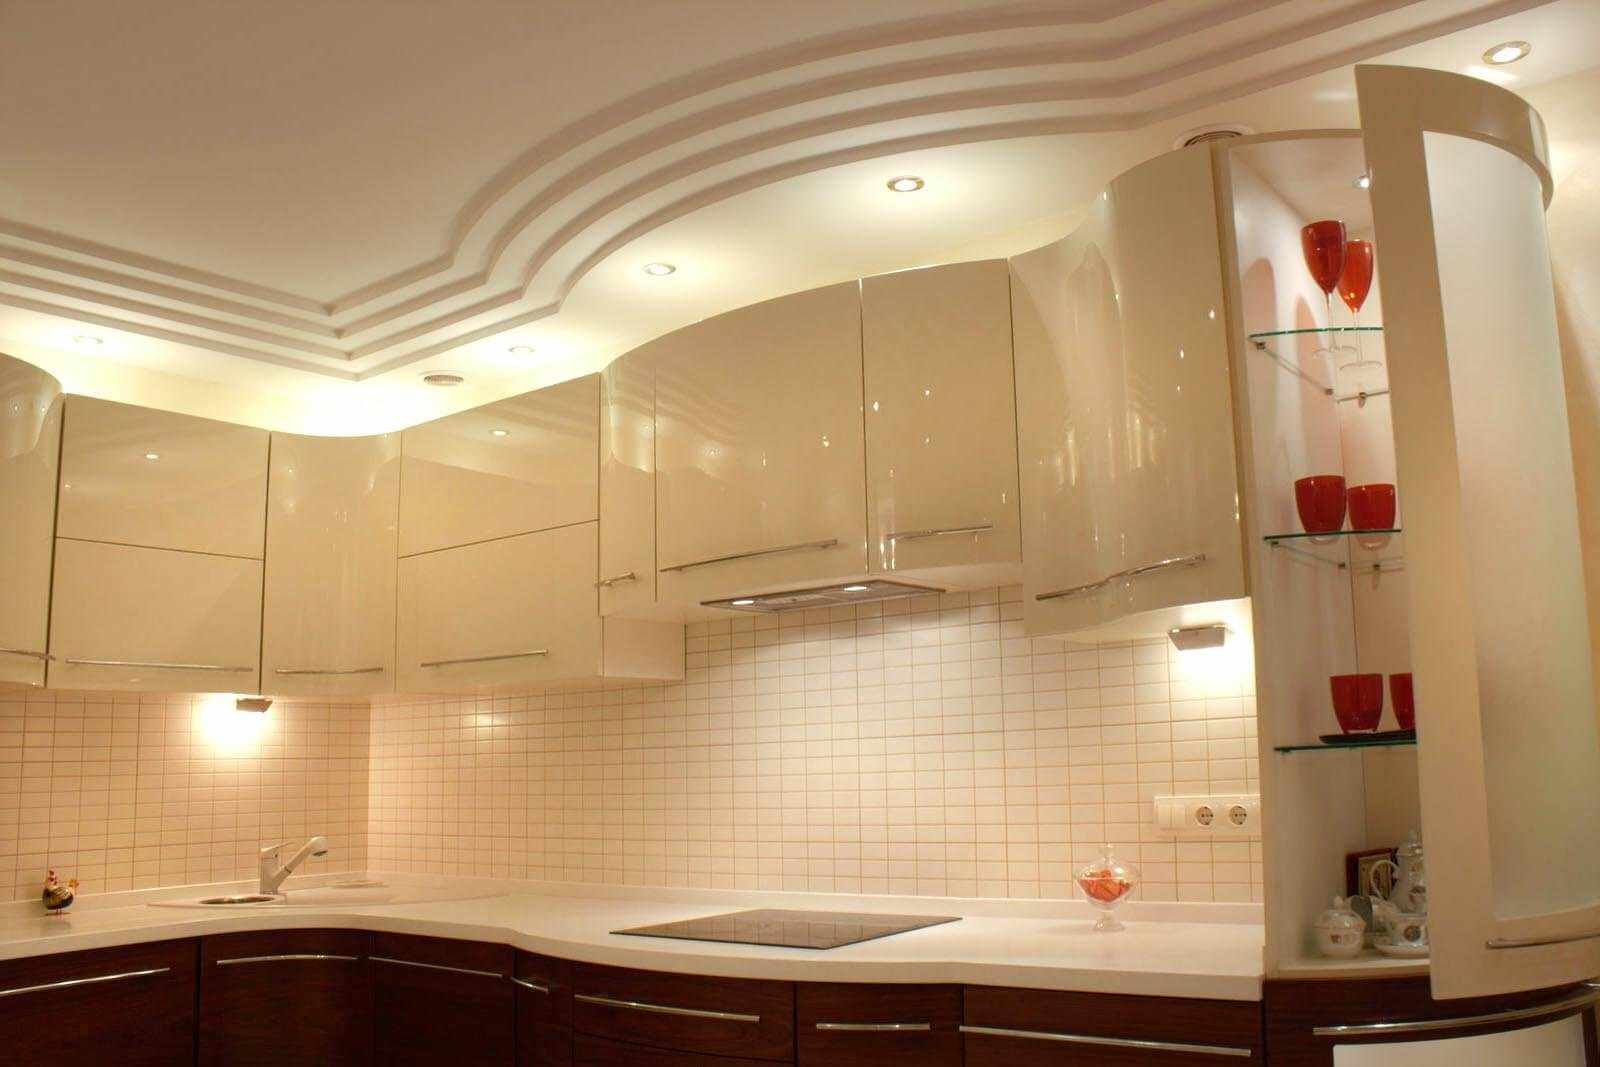 An example of a light kitchen ceiling design